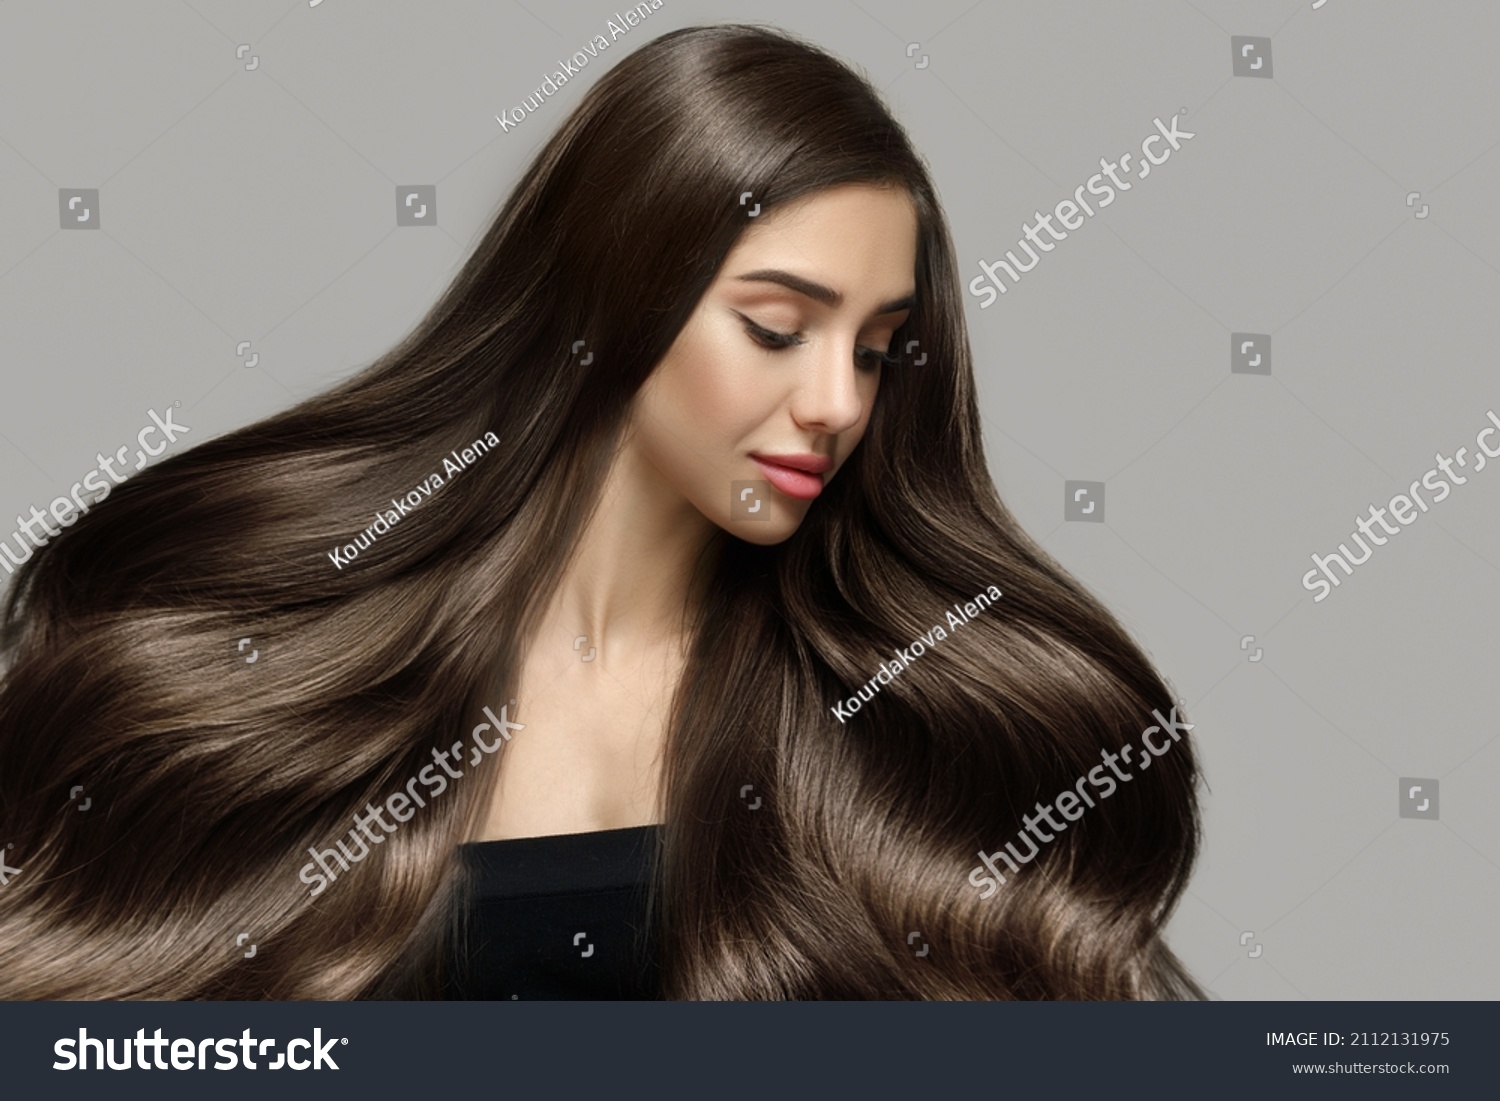 Long beautiful wavy hair. Portrait of a woman with shiny blond hair. copycpase #2112131975